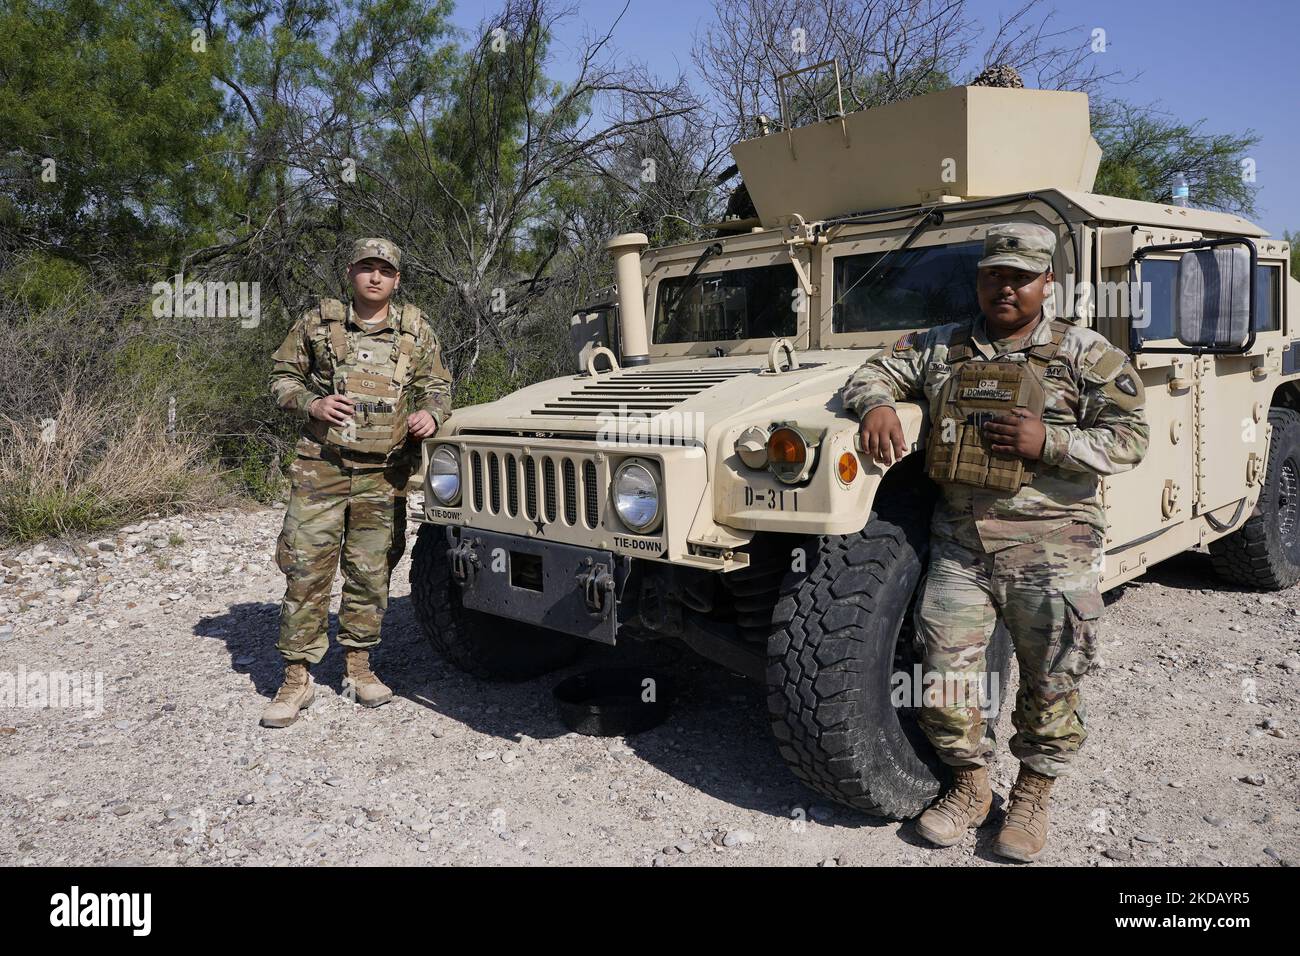 Texas National guardsmen. stand guard along a highway just six miles from the boredr on May 26 2022 near Eagle Pass Texas, USA. Title 42, the Trump era mandate which was set to prevent migrants from entering the US, was to expire on May 23 but was blocked by a lawsuit filed by several states citing that the move to strike down the law “failed to meet standards set by the Administrative Procedure Act” and that there is no permanent solution to handling the inevitable surge in immigration. Opponents to upholding of the law voiced their demands stating that Title 42 is illegal in that it violates Stock Photo